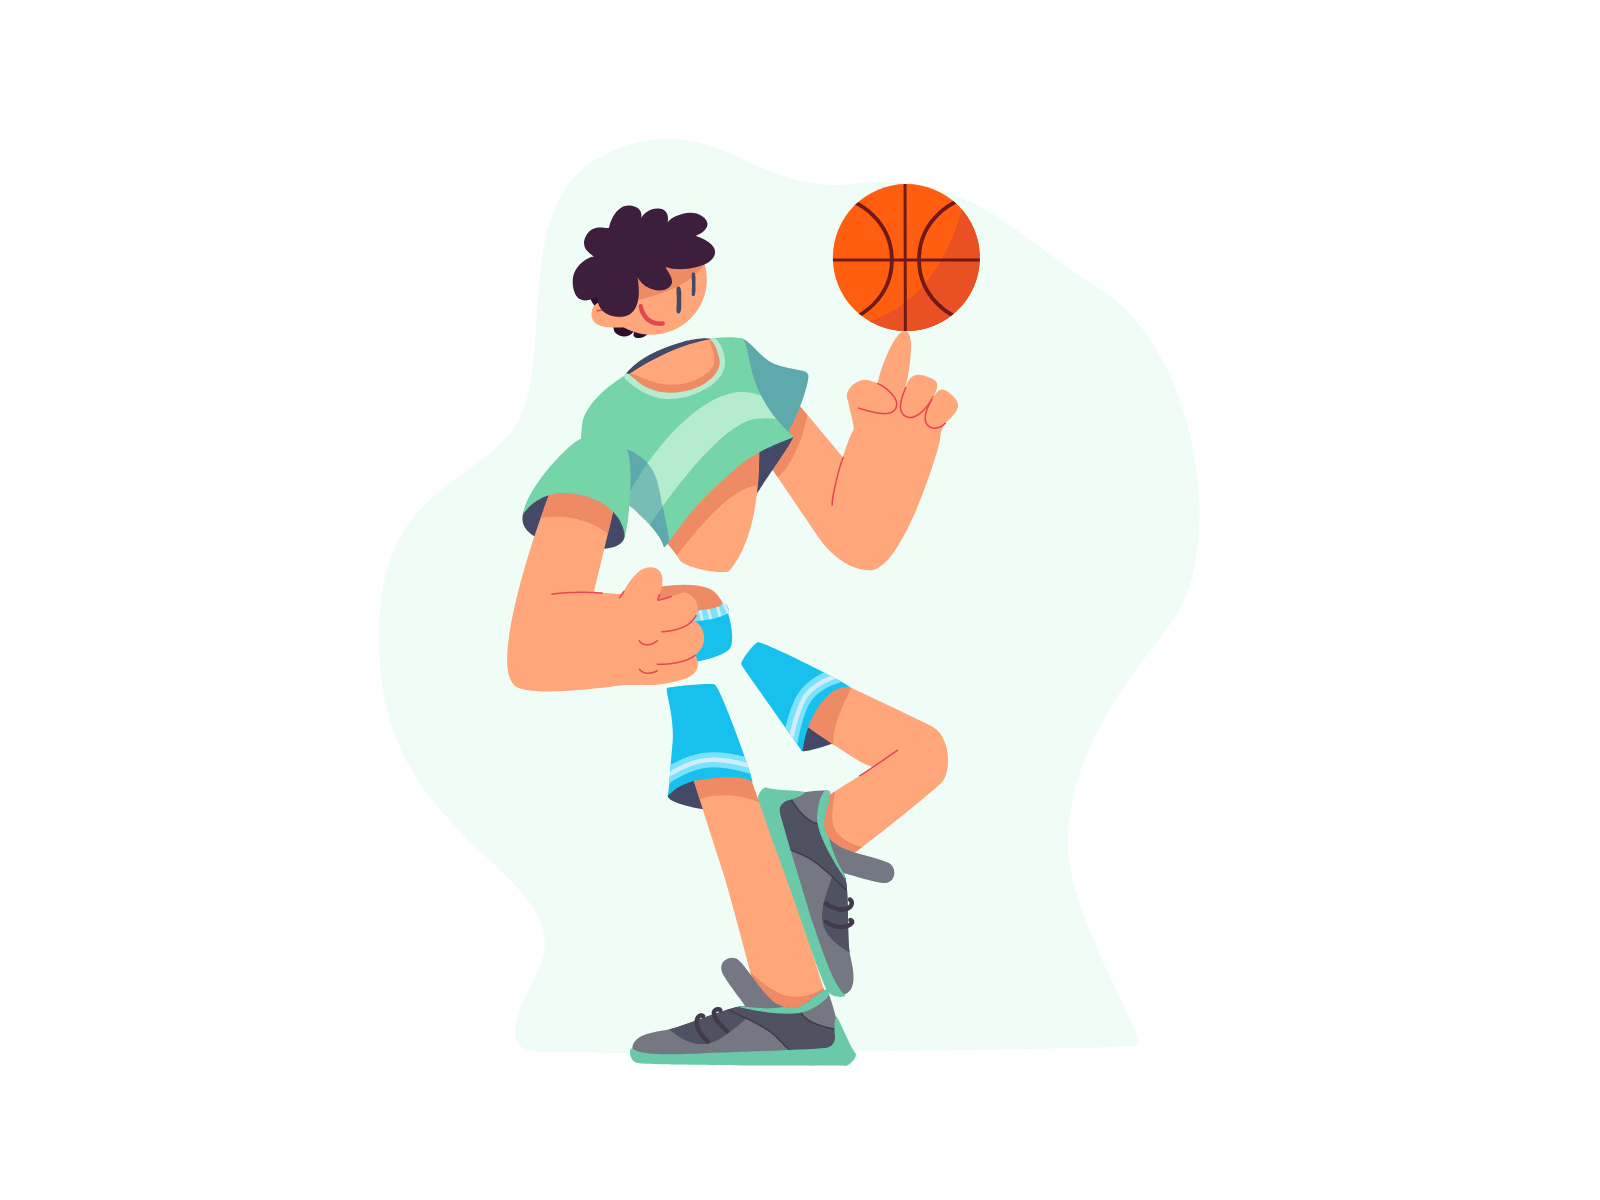 Basketball Spin 2d animation basketball character design finger graphic design illustration madewithsvgator motion graphics pieces playing segmented simple smile spin spinning sports sporty vector